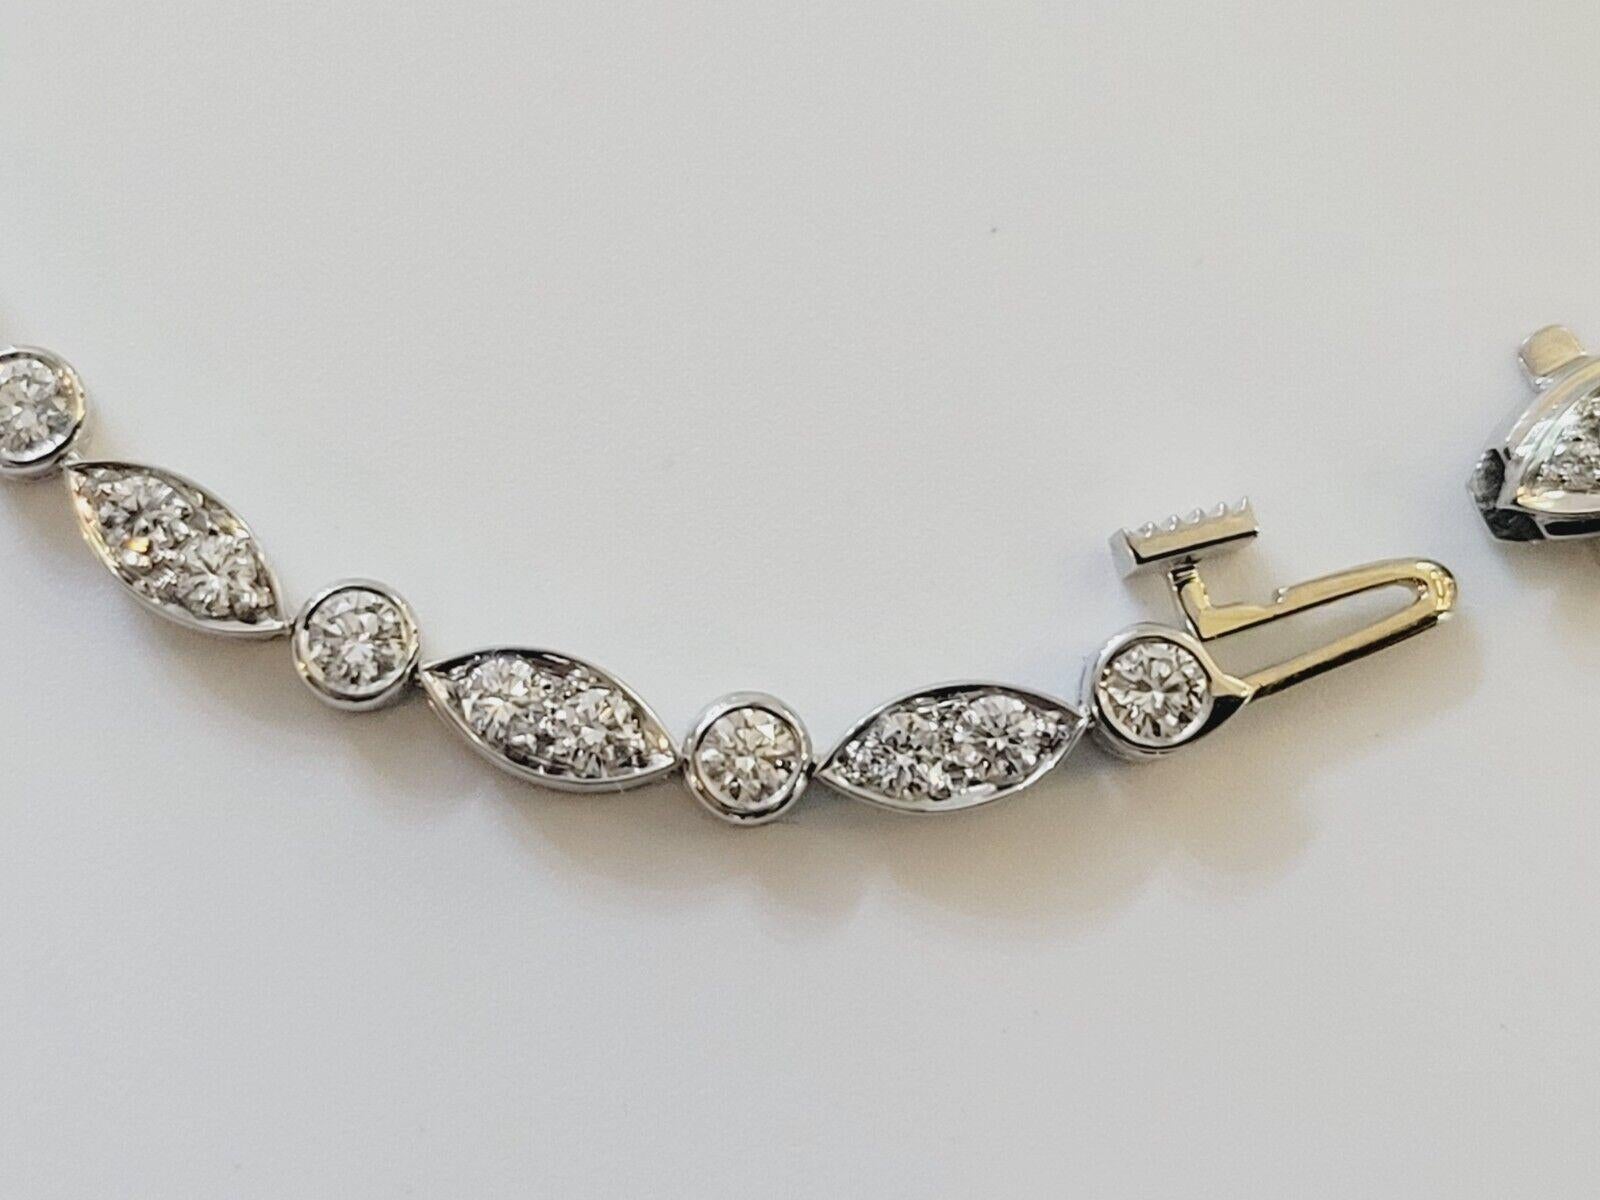  Excellent condition.
Tiffany Co Jazz Diamond Platinum Bracelet.
1.60 Ct in total 
Length: 7 inch
Width: 3 mm
Weight: 11 gram
White Round Brilliant Diamonds 
Color: F 
Comes with original Tiffany Box

